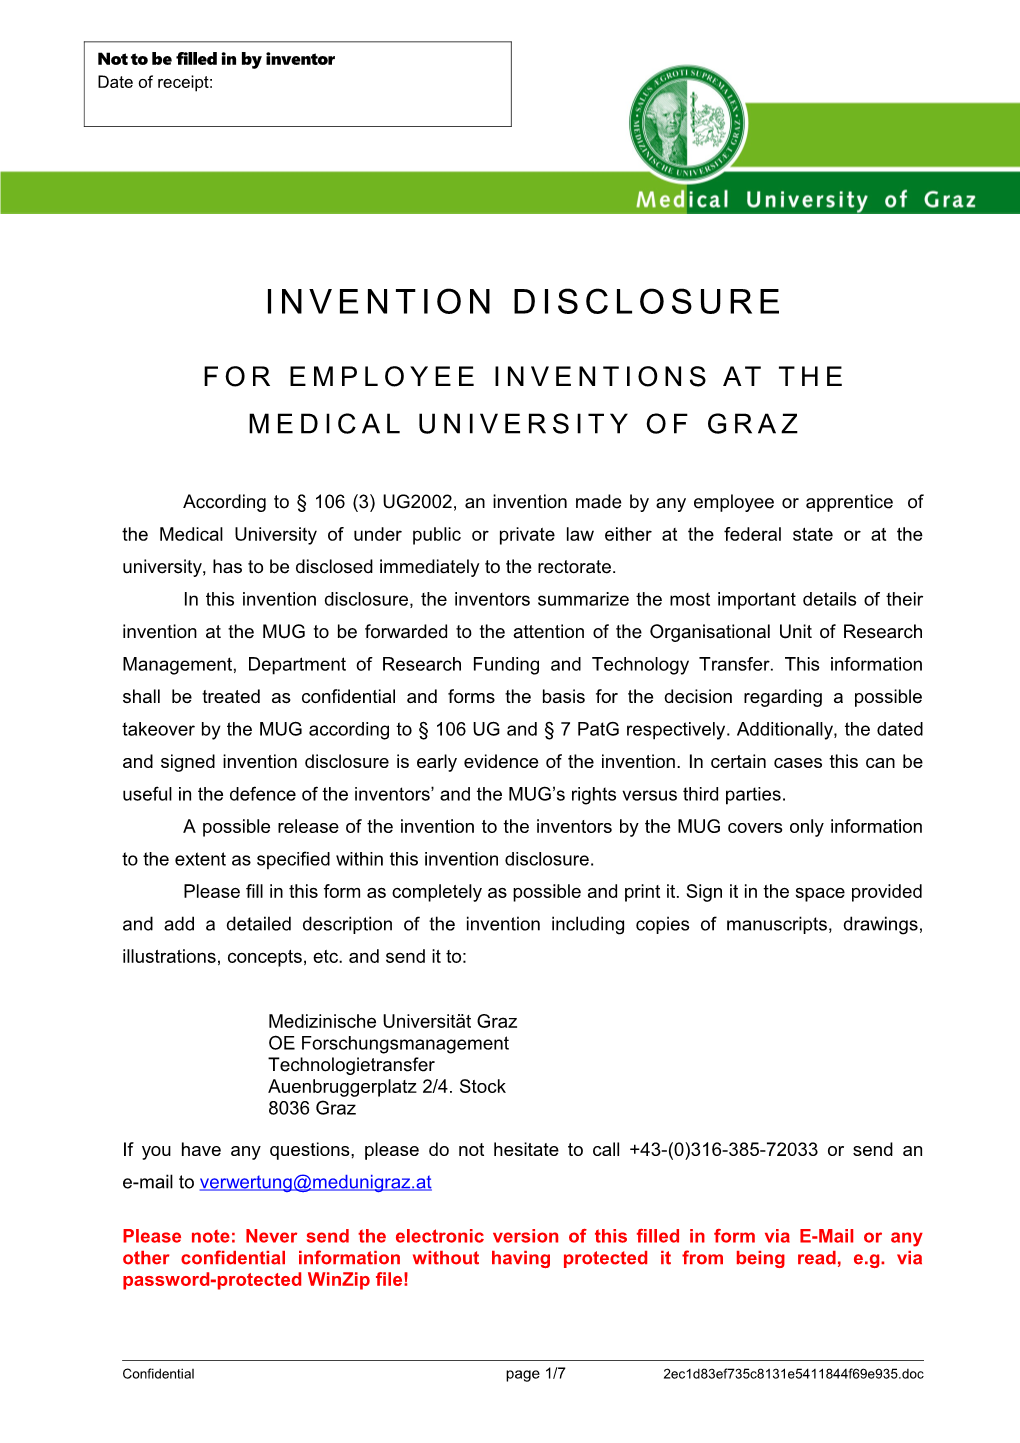 For Employee Inventions at the Medical University of Graz